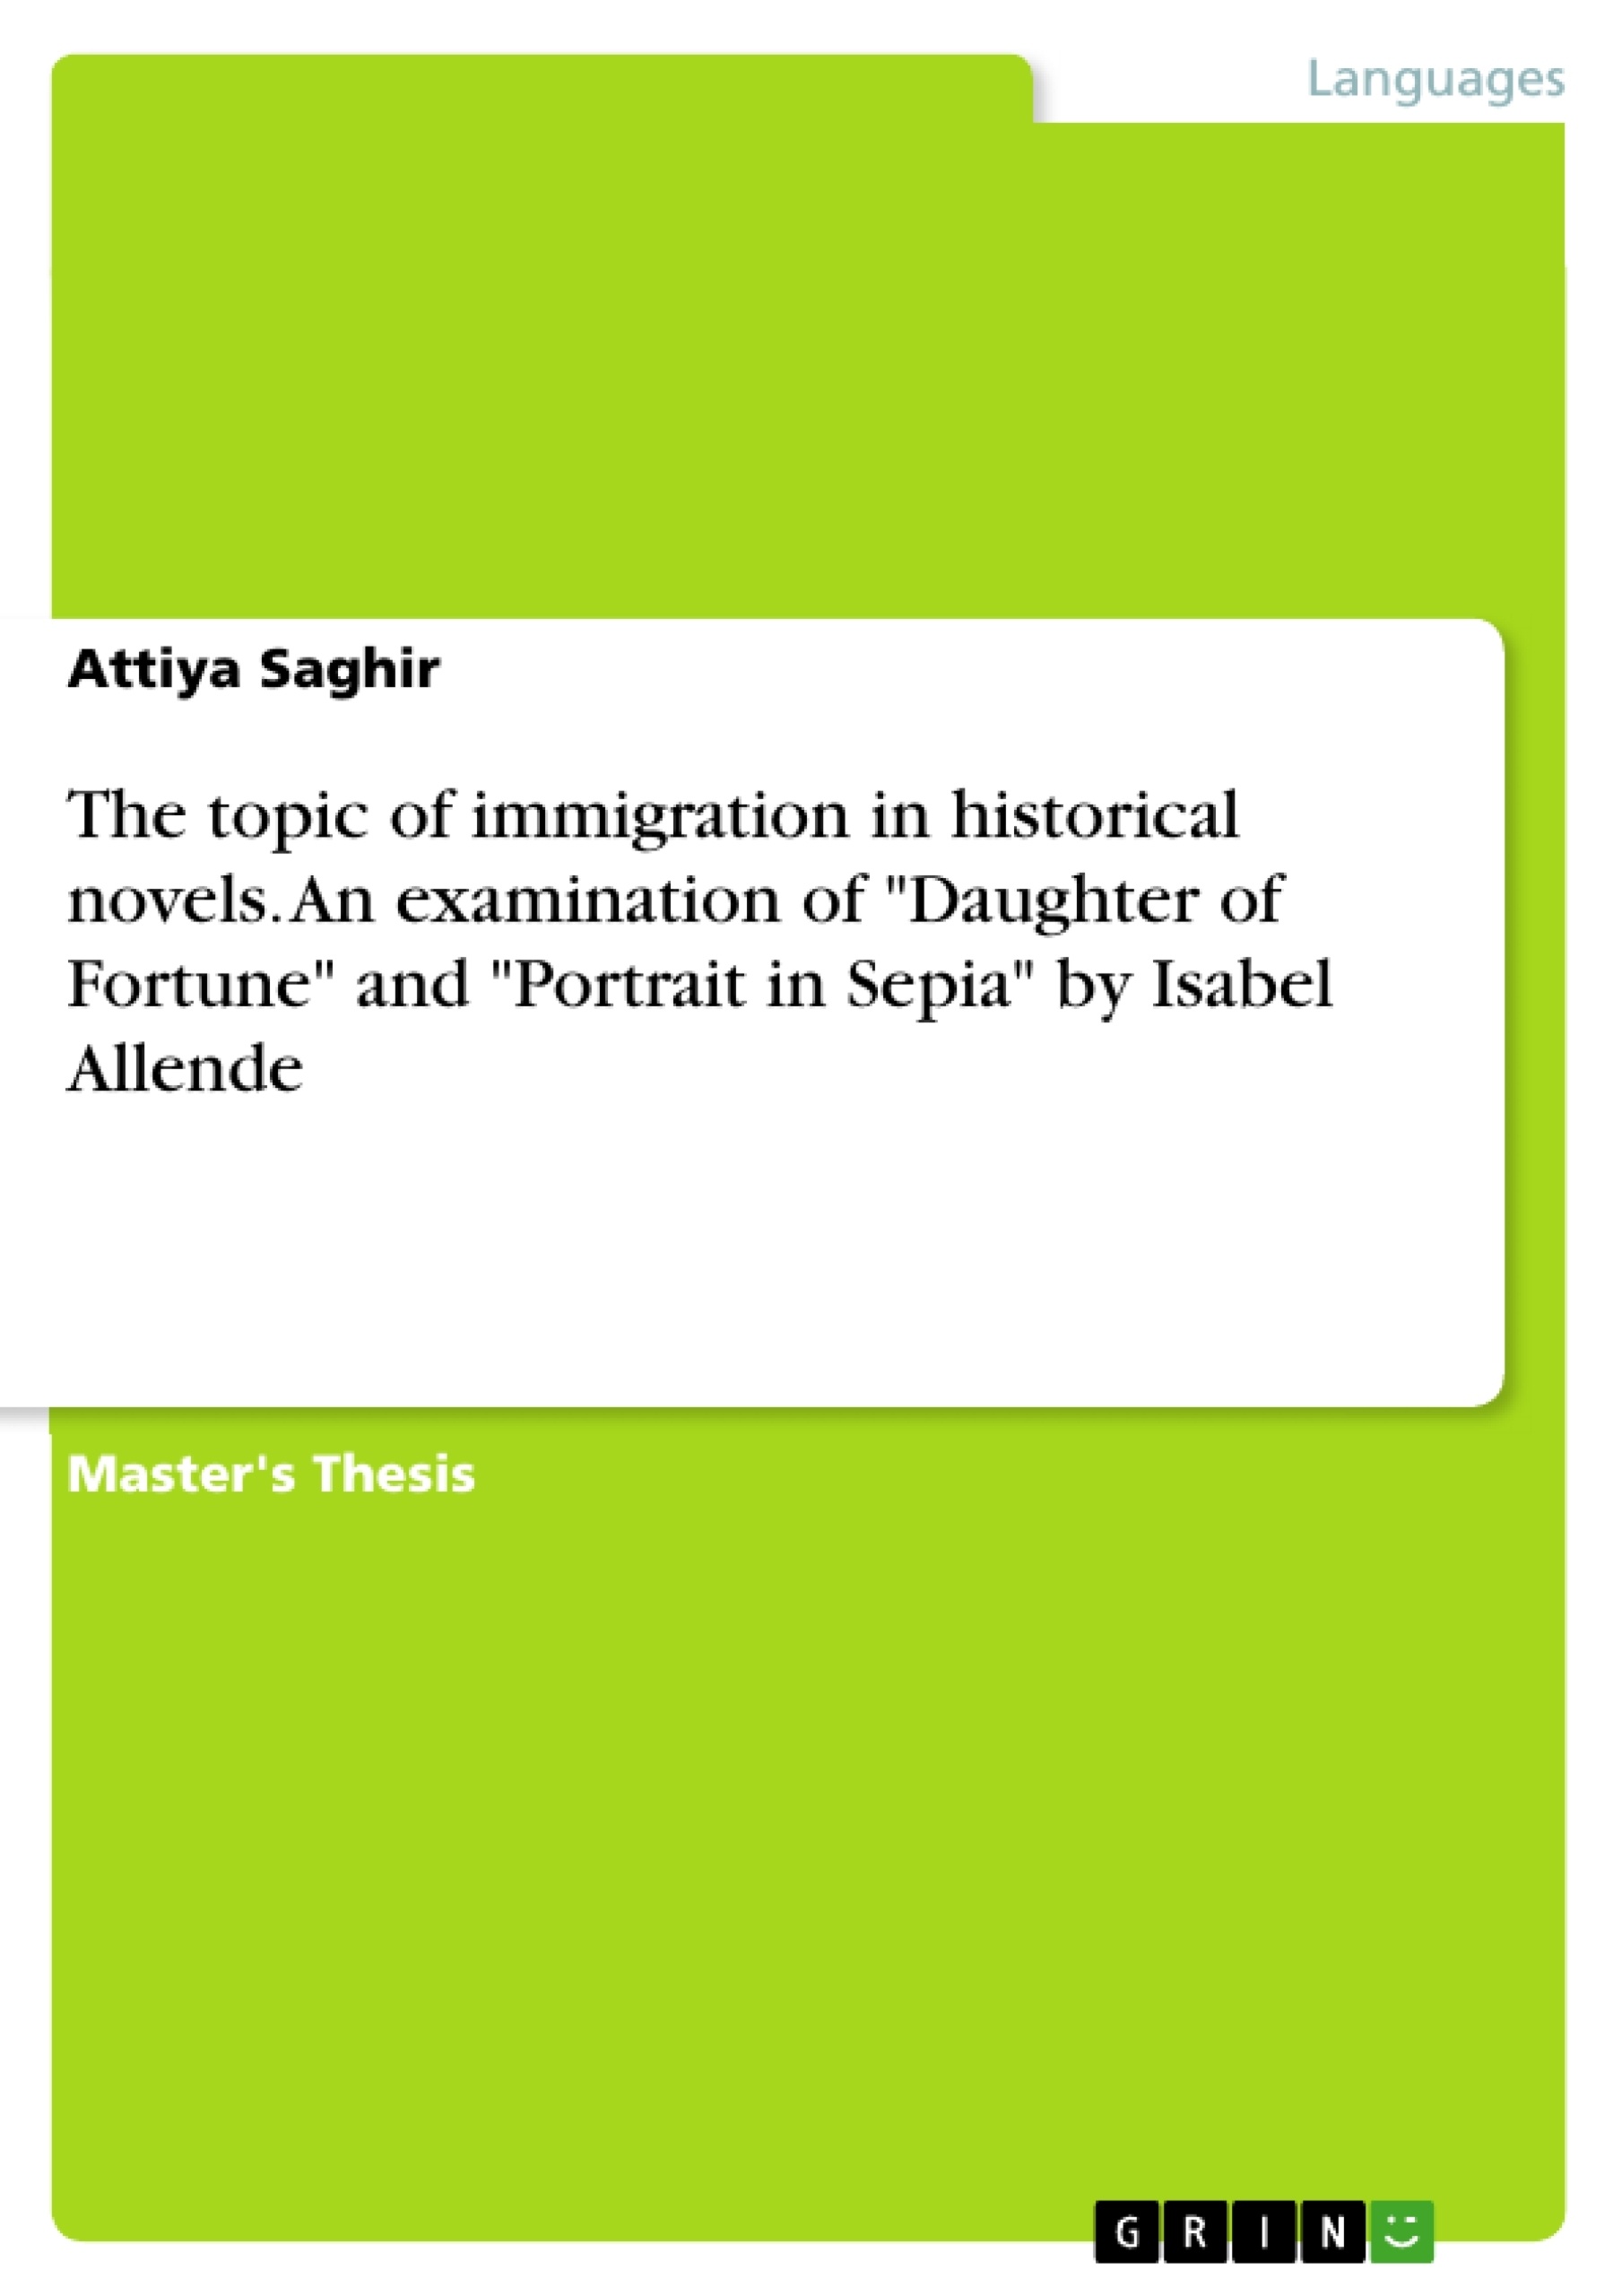 Title: The topic of immigration in historical novels. An examination of "Daughter of Fortune" and "Portrait in Sepia" by Isabel Allende